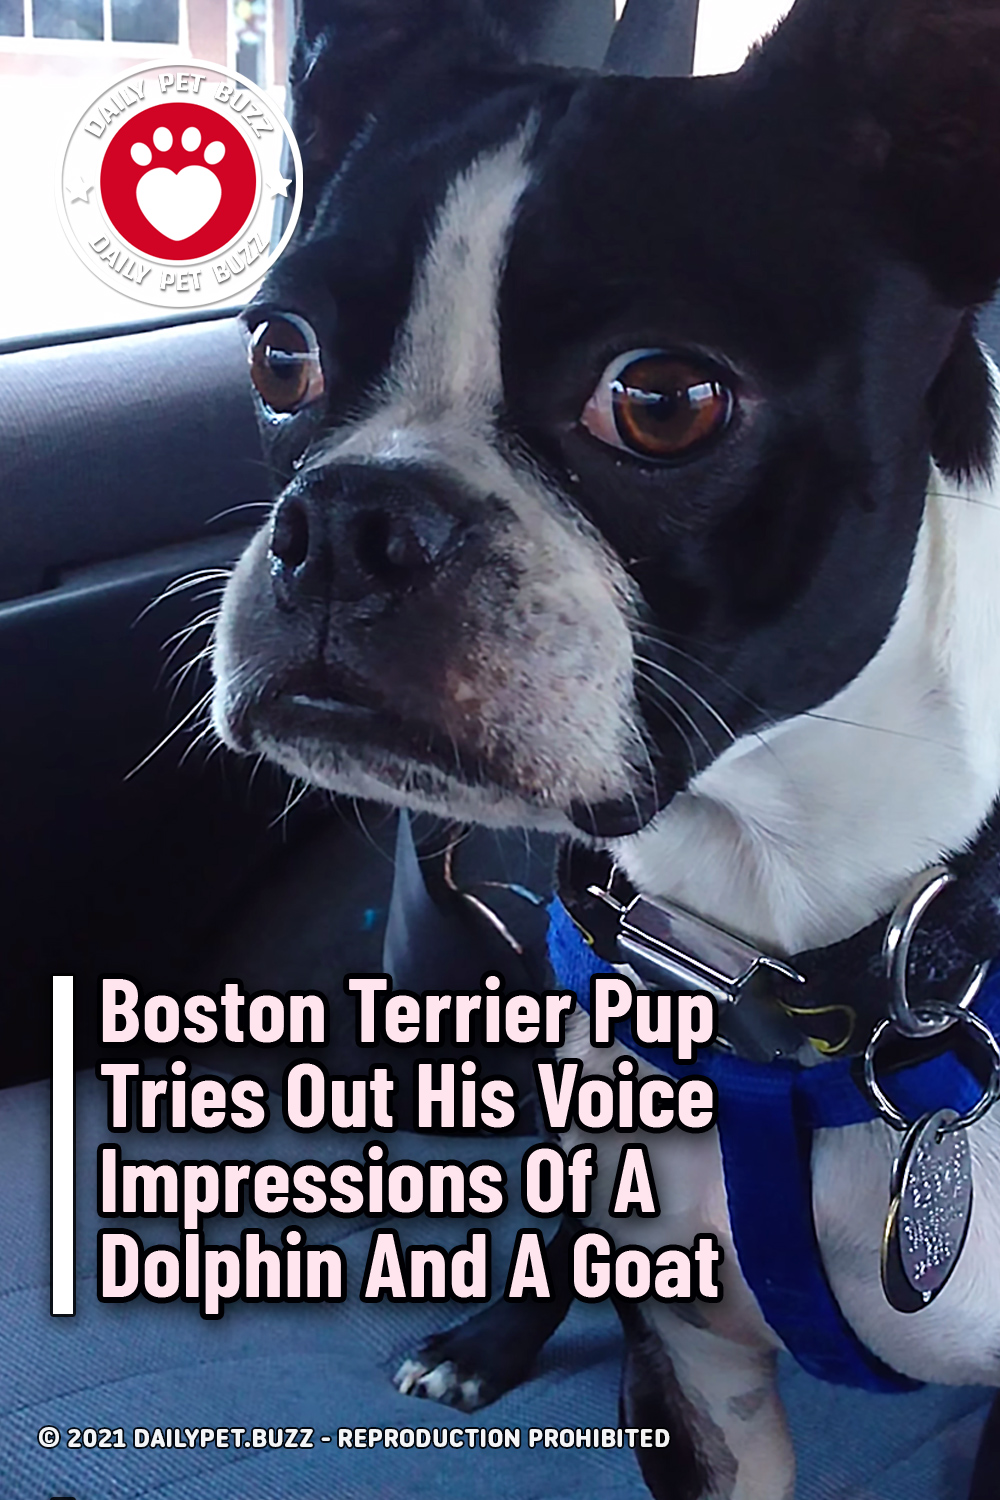 Boston Terrier Pup Tries Out His Voice Impressions Of A Dolphin And A Goat